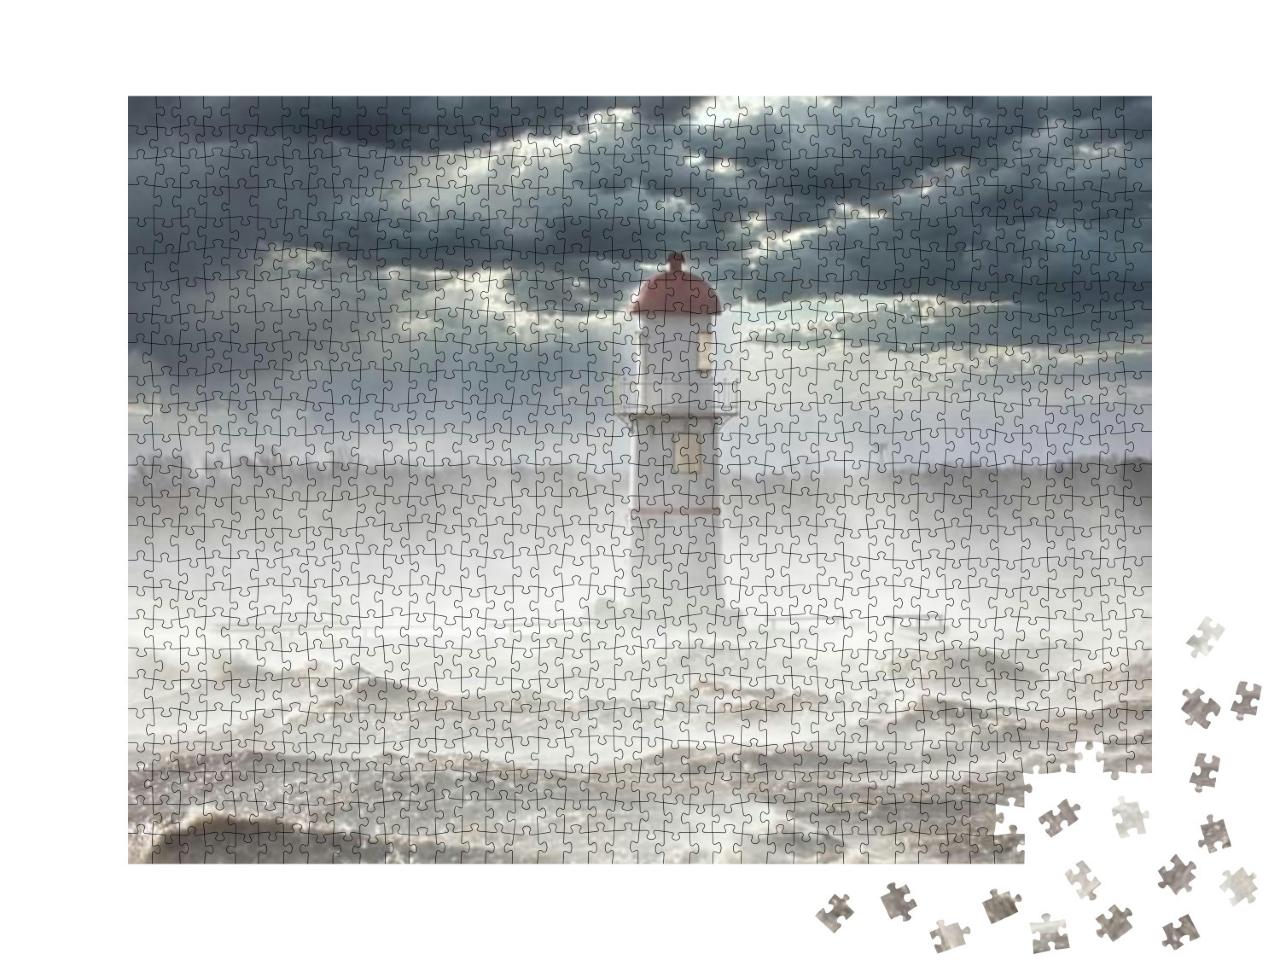 Lighthouse in a Severe Storm Being Battered by the Oncomi... Jigsaw Puzzle with 1000 pieces